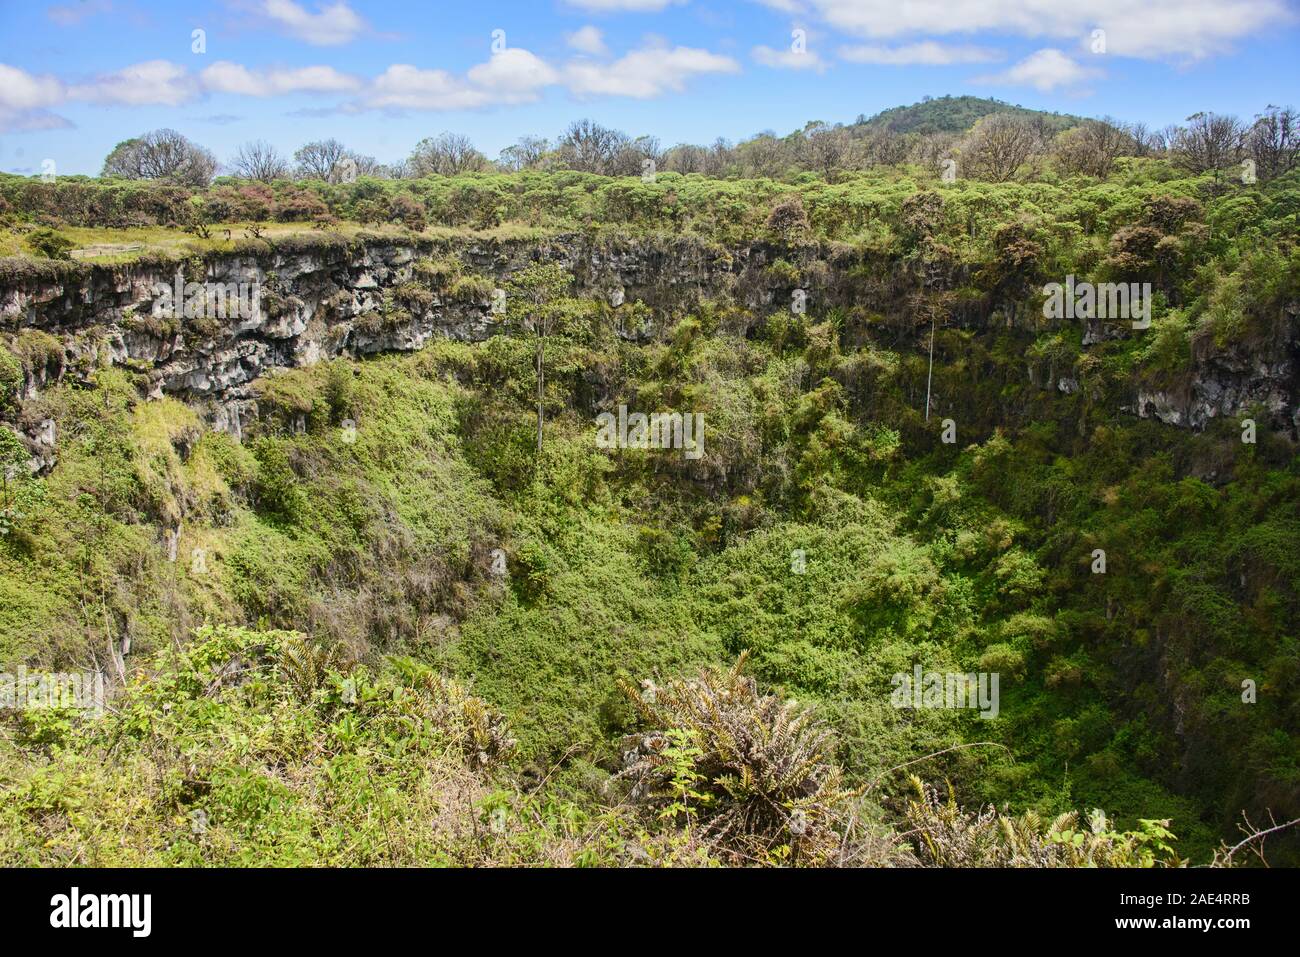 Los Gemelos volcanic sinkholes and Scalesia giant daisy trees, Galapagos Islands, Ecuador Stock Photo